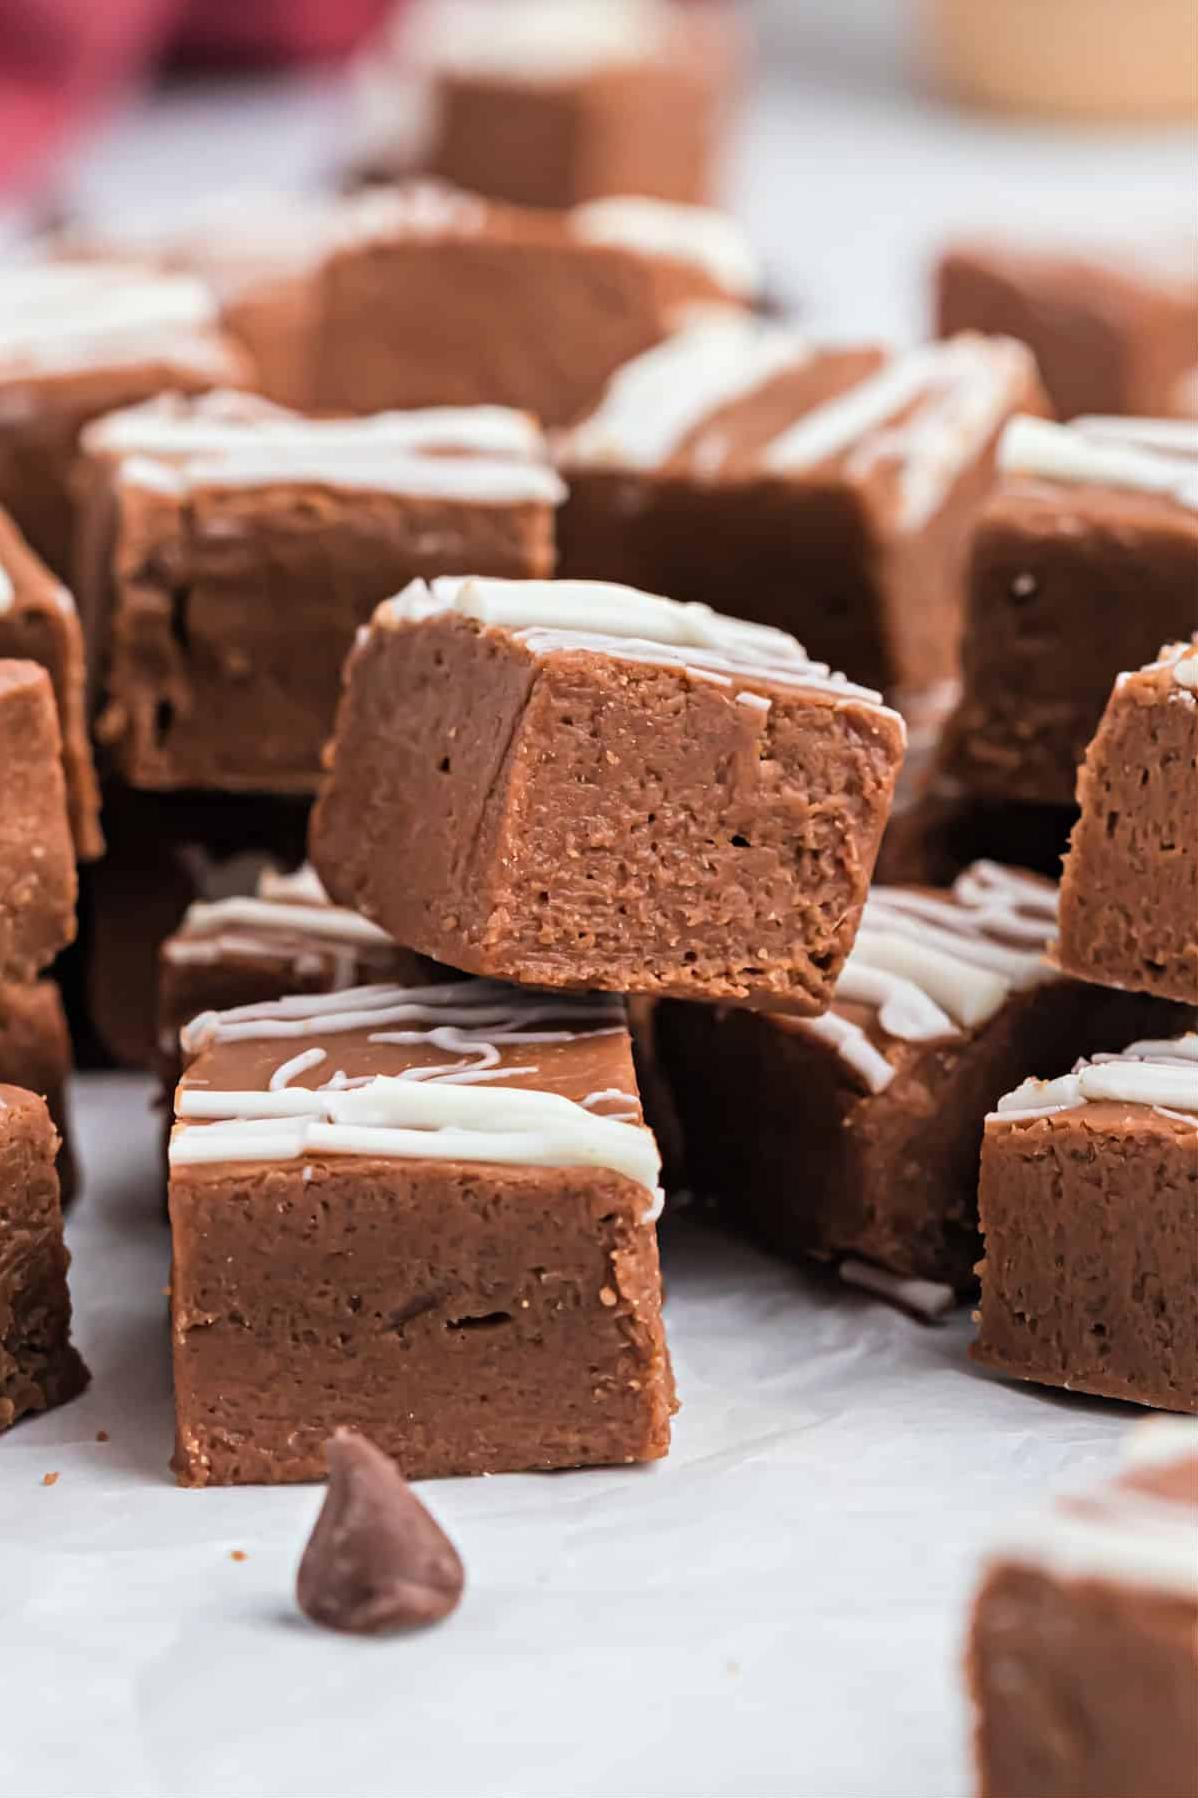  You won't need the luck of the Irish to make this fudge